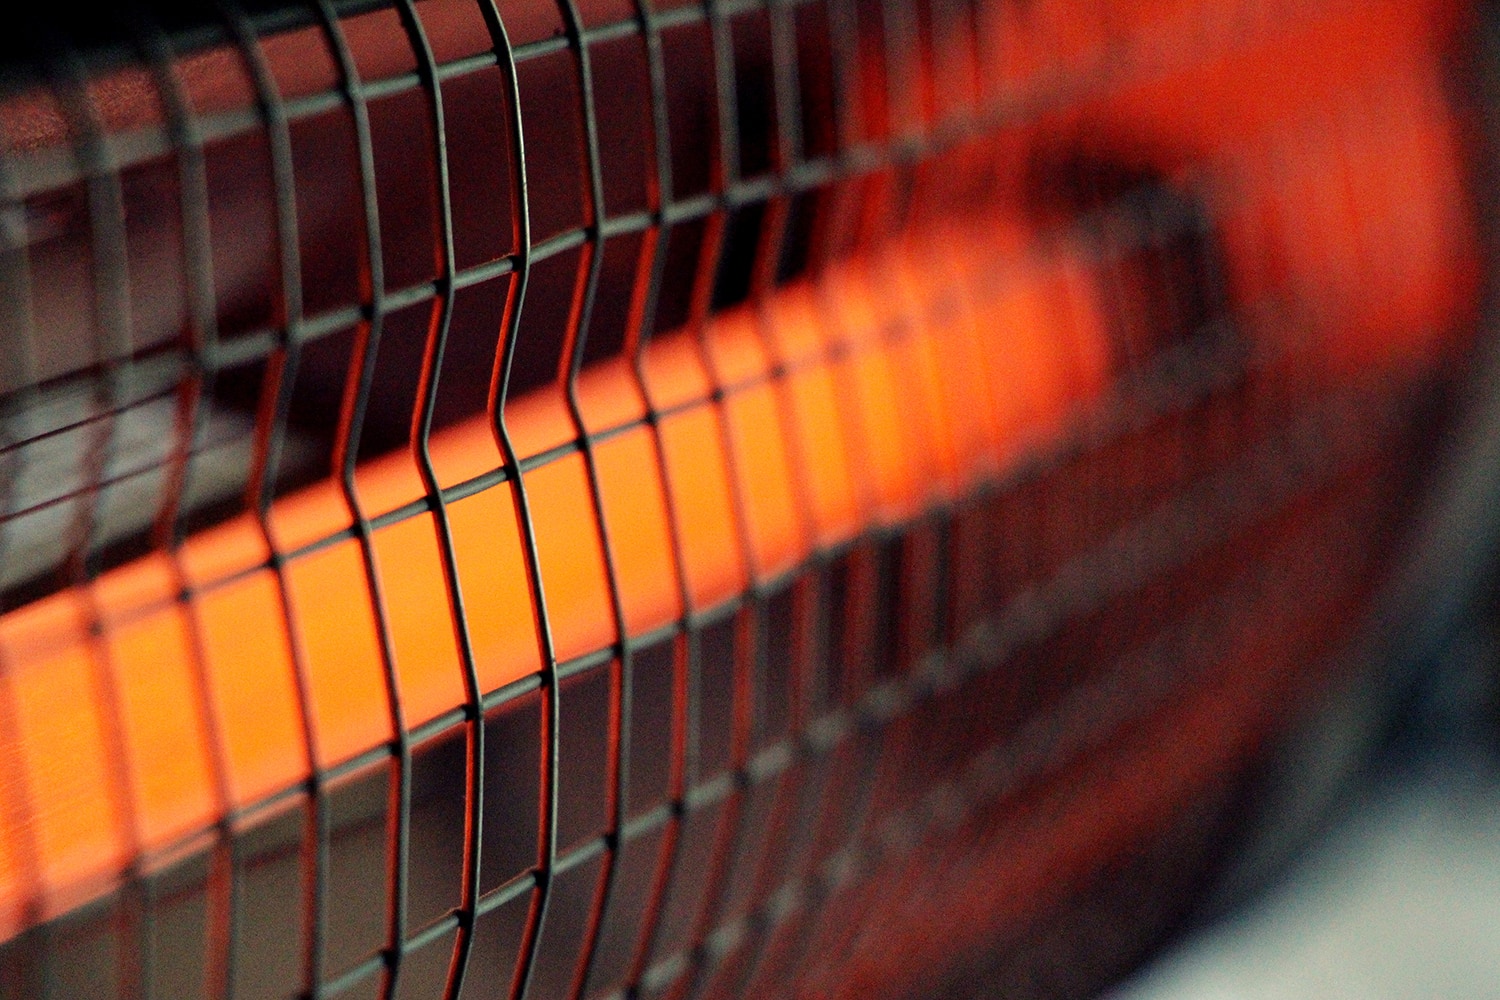 Electric red heater close-up with a metal grill